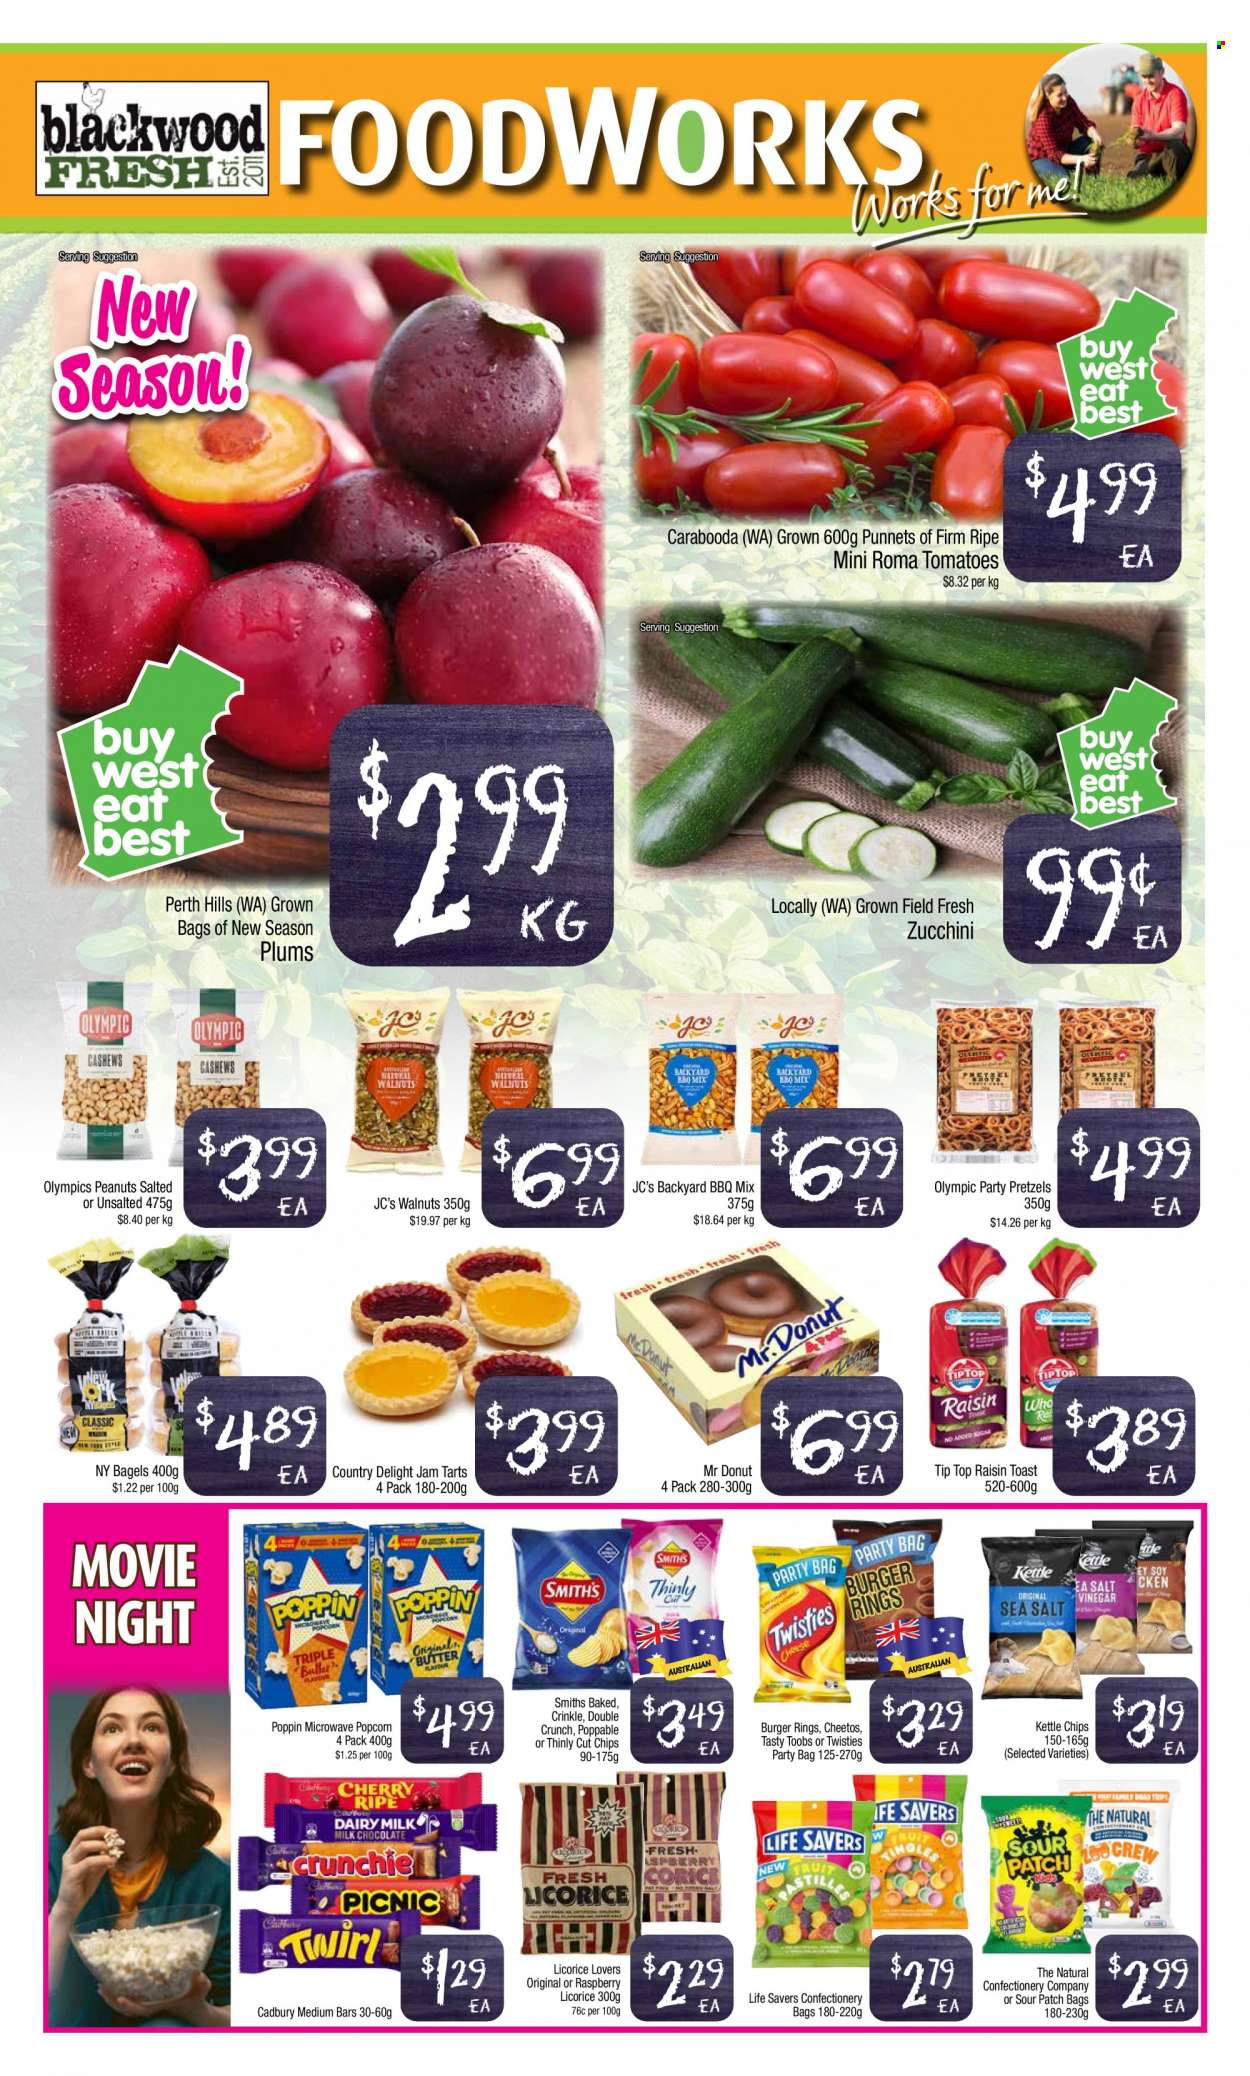 thumbnail - Foodworks Catalogue - 8 Feb 2023 - 14 Feb 2023 - Sales products - bagels, pretzels, Tip Top, donut, zucchini, tomatoes, plums, cherries, carp, hamburger, milk chocolate, chocolate, Cadbury, Dairy Milk, Sour Patch, Cheetos, Smith's, popcorn, fruit jam, cashews, walnuts, peanuts, Hill's. Page 3.